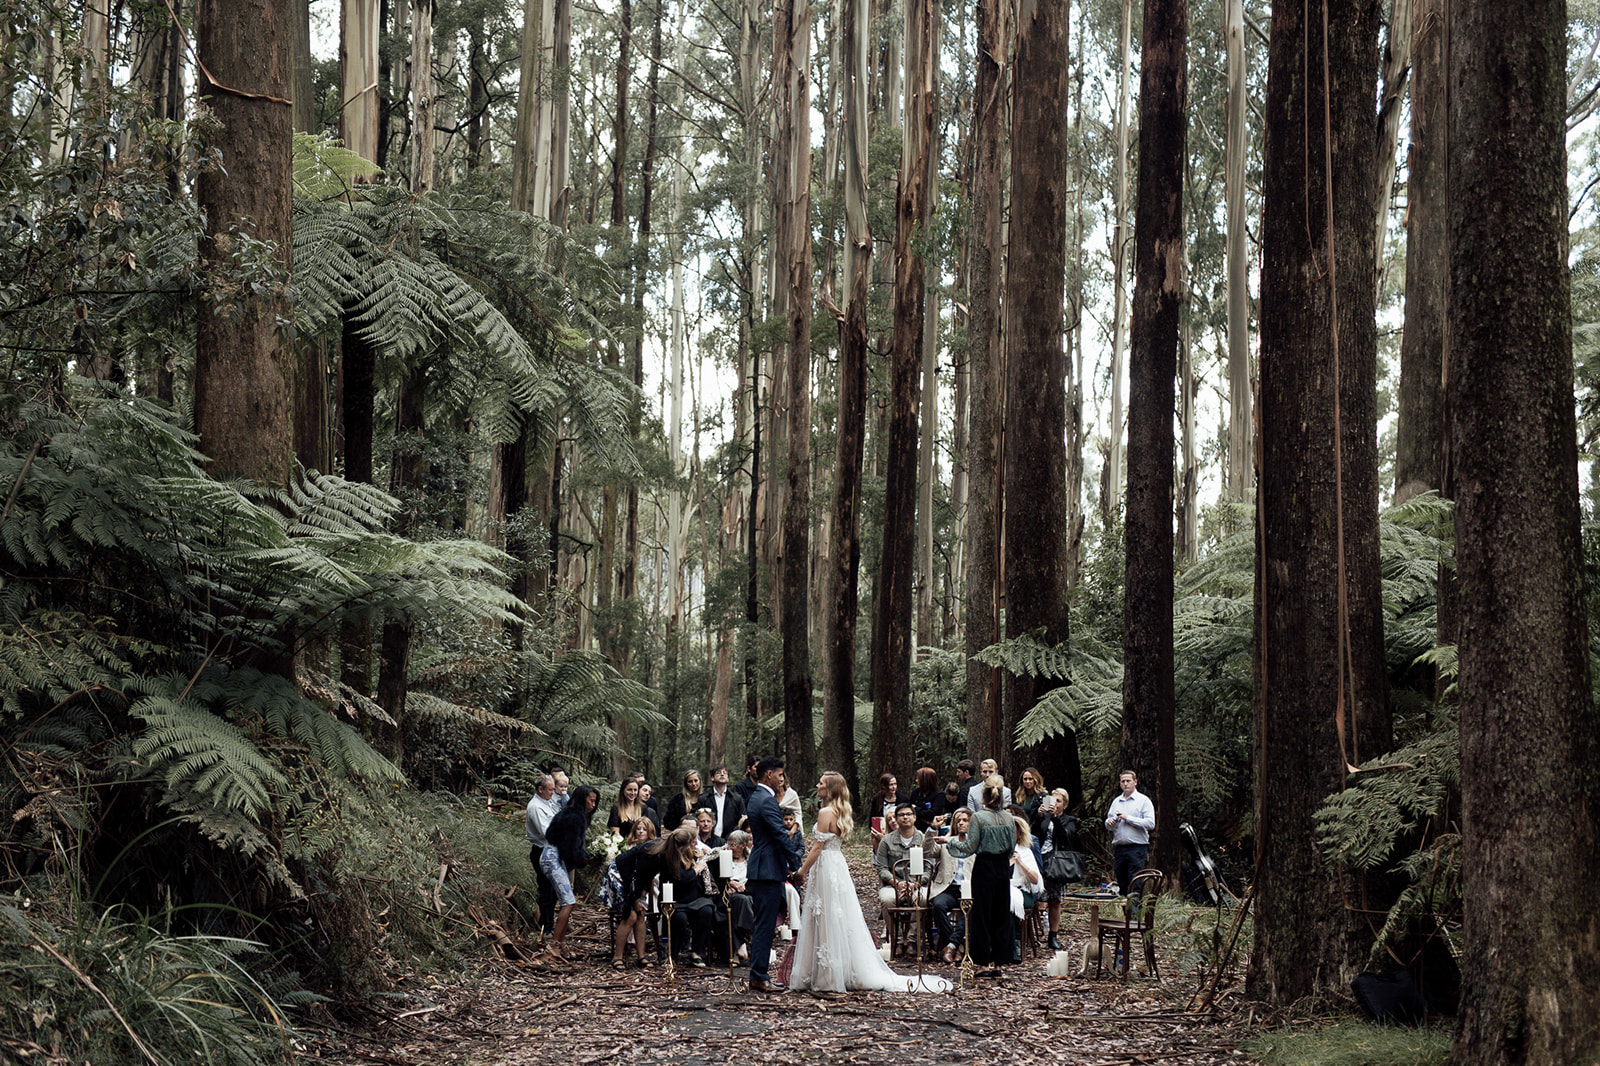 Elopement in the forest near Melbourne